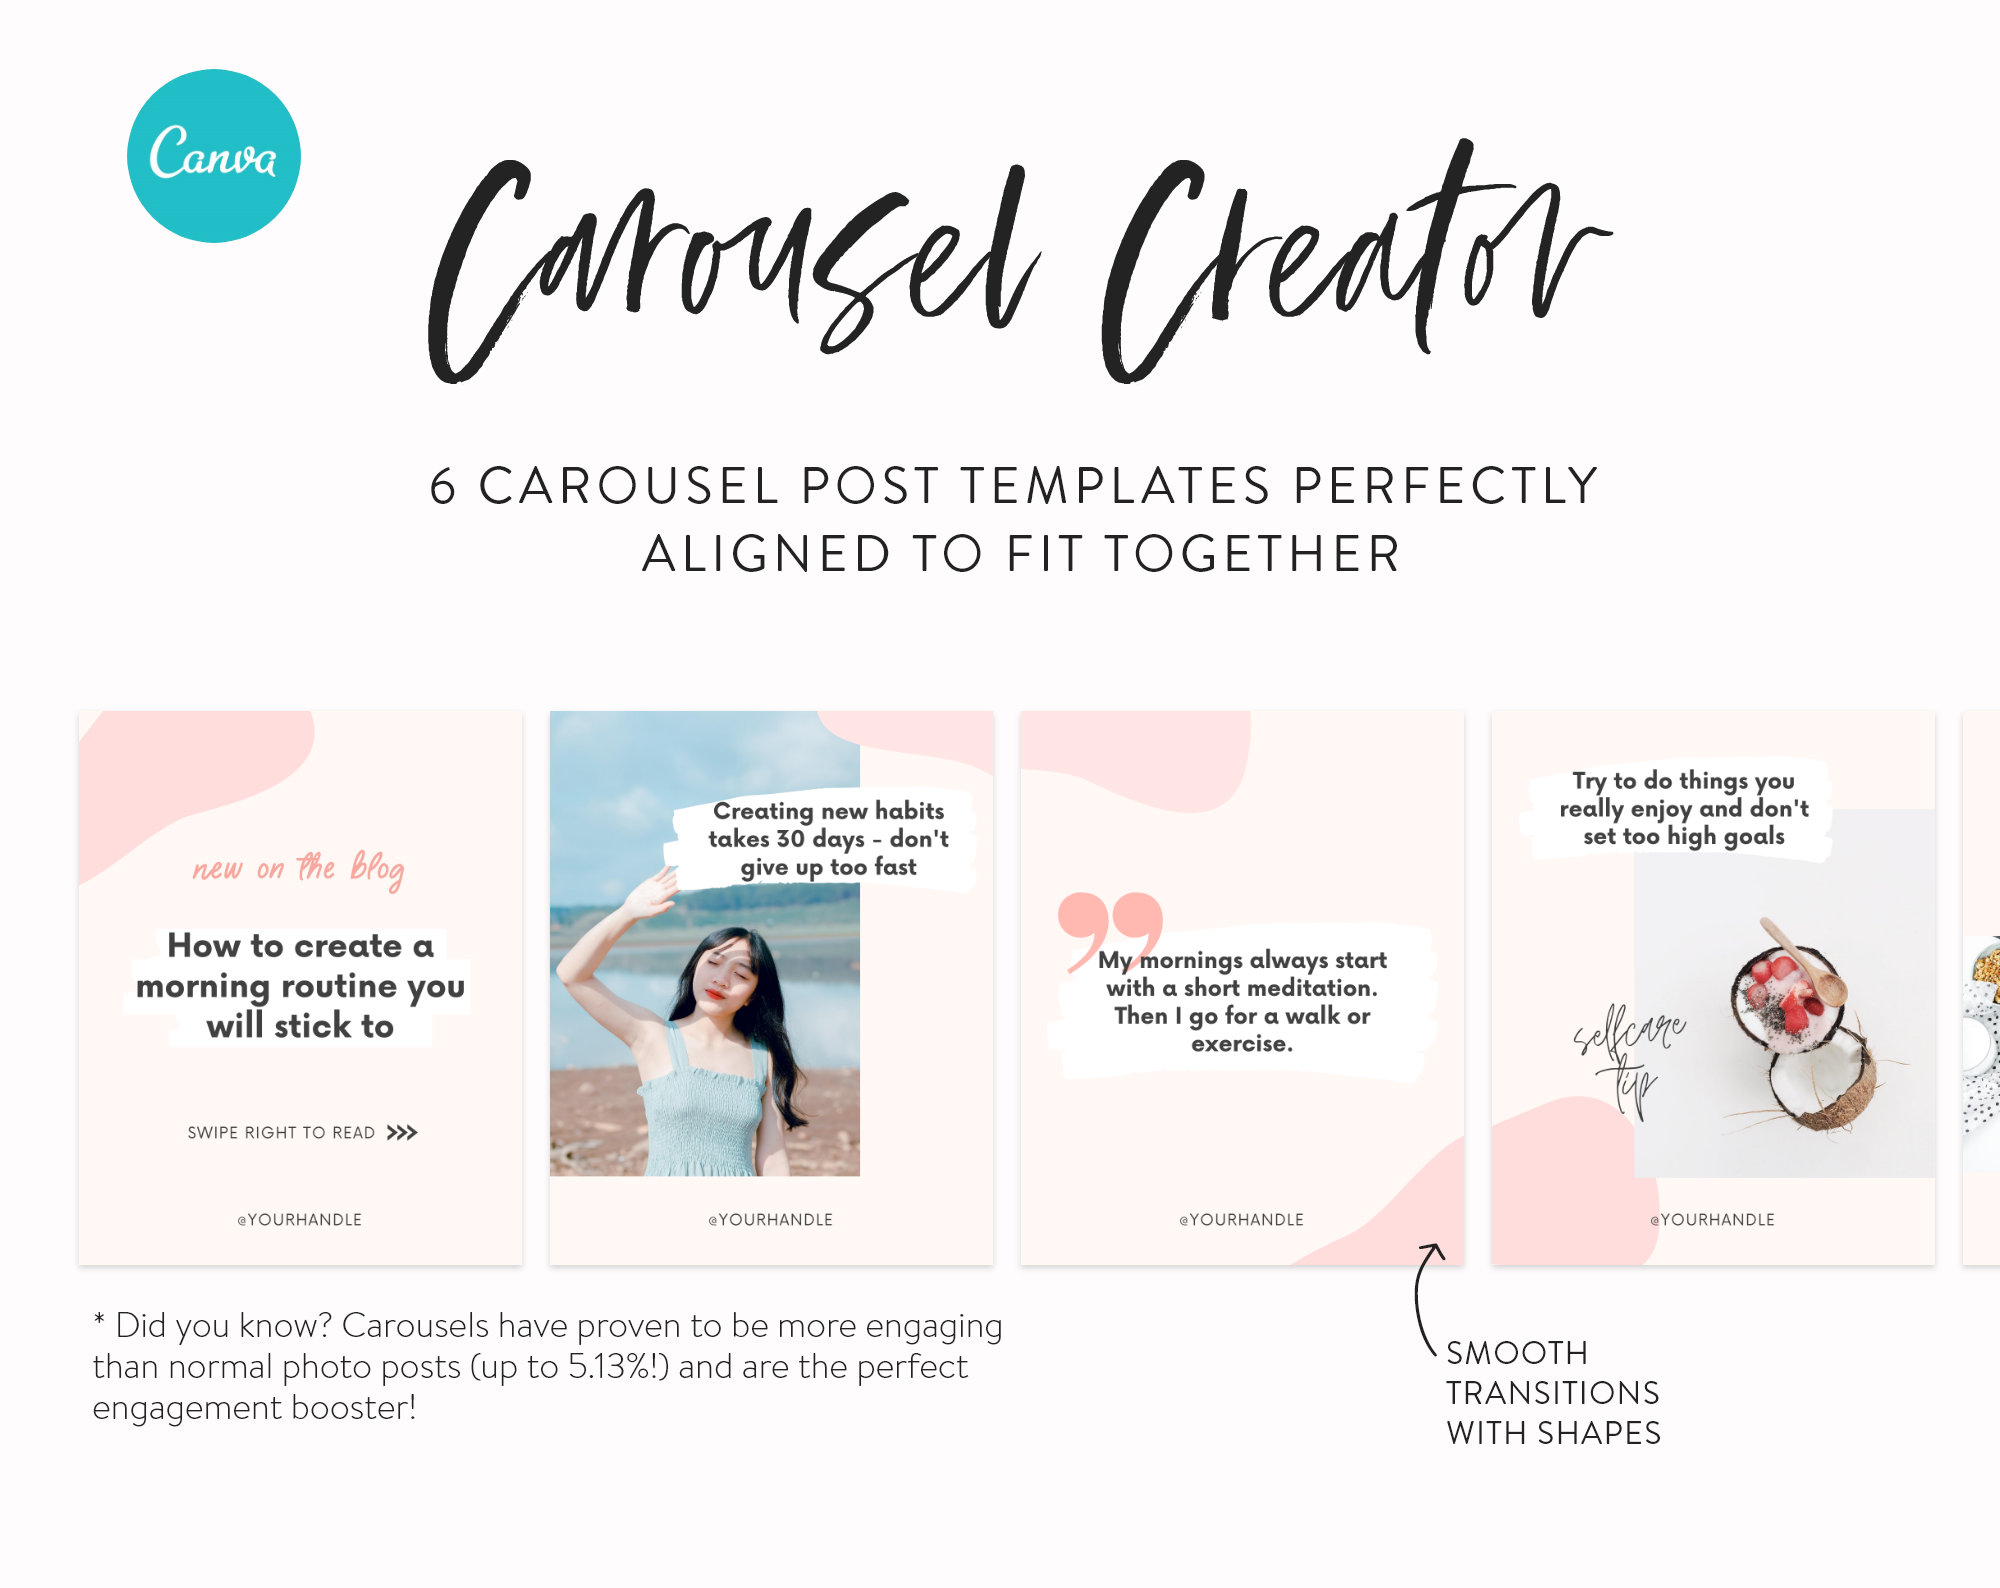 positivity-affirmations-post-templates-for-canva-carousel-creator